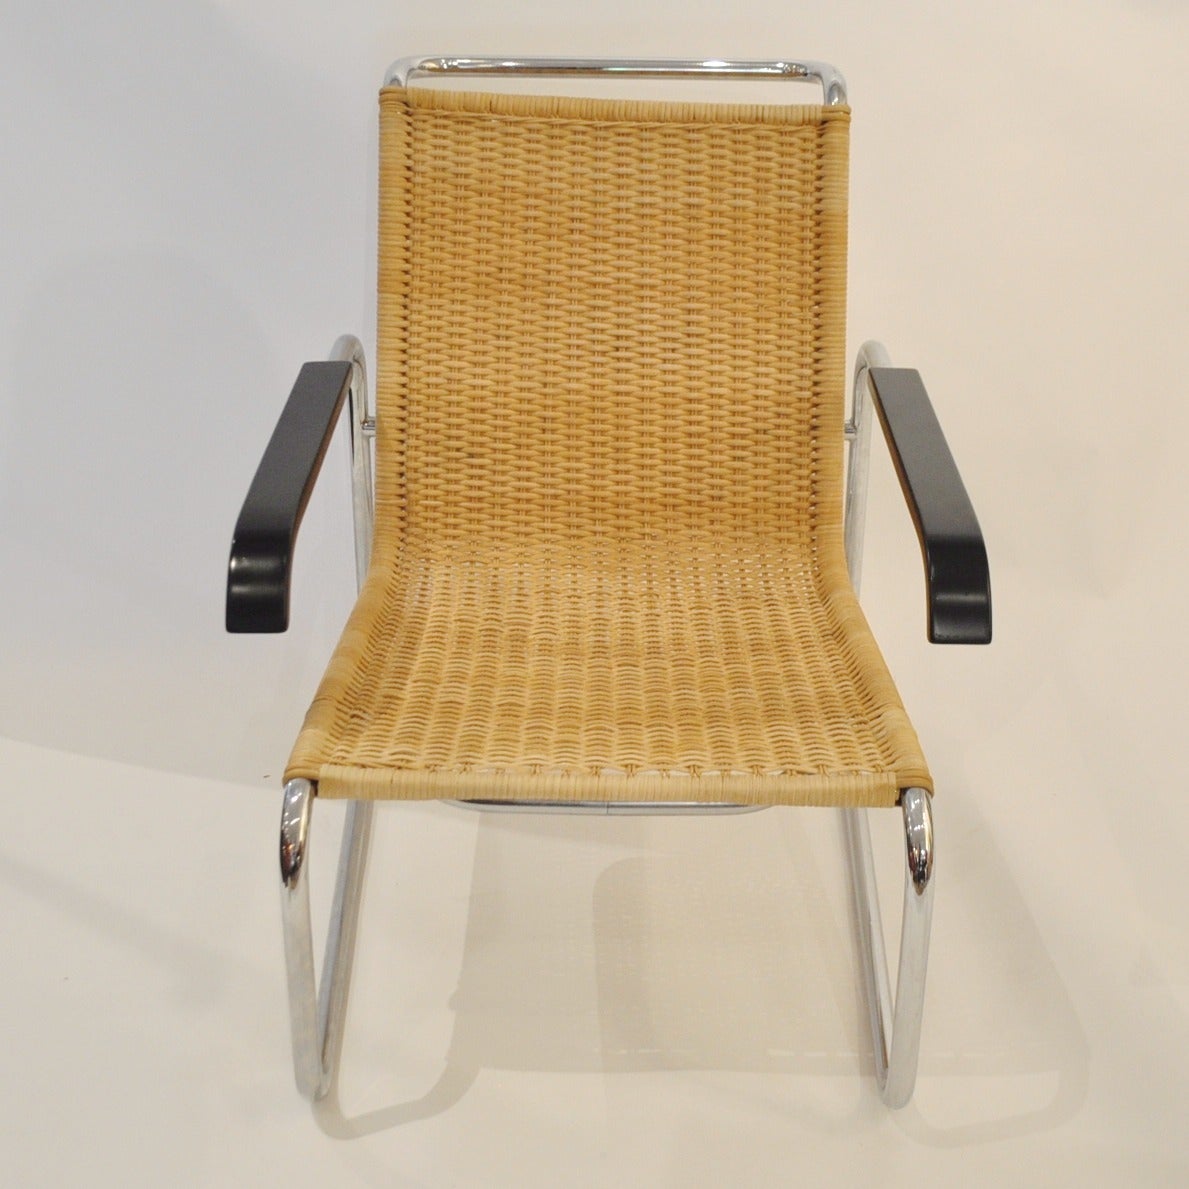 These chairs were originally designed in 1928/29 by German designer Marcel Breuer. This pair is made by Thonet in the 1960s and features a continuous tube of chrome plated steel that forms the seat, backrest and armrests of the chair. The separate